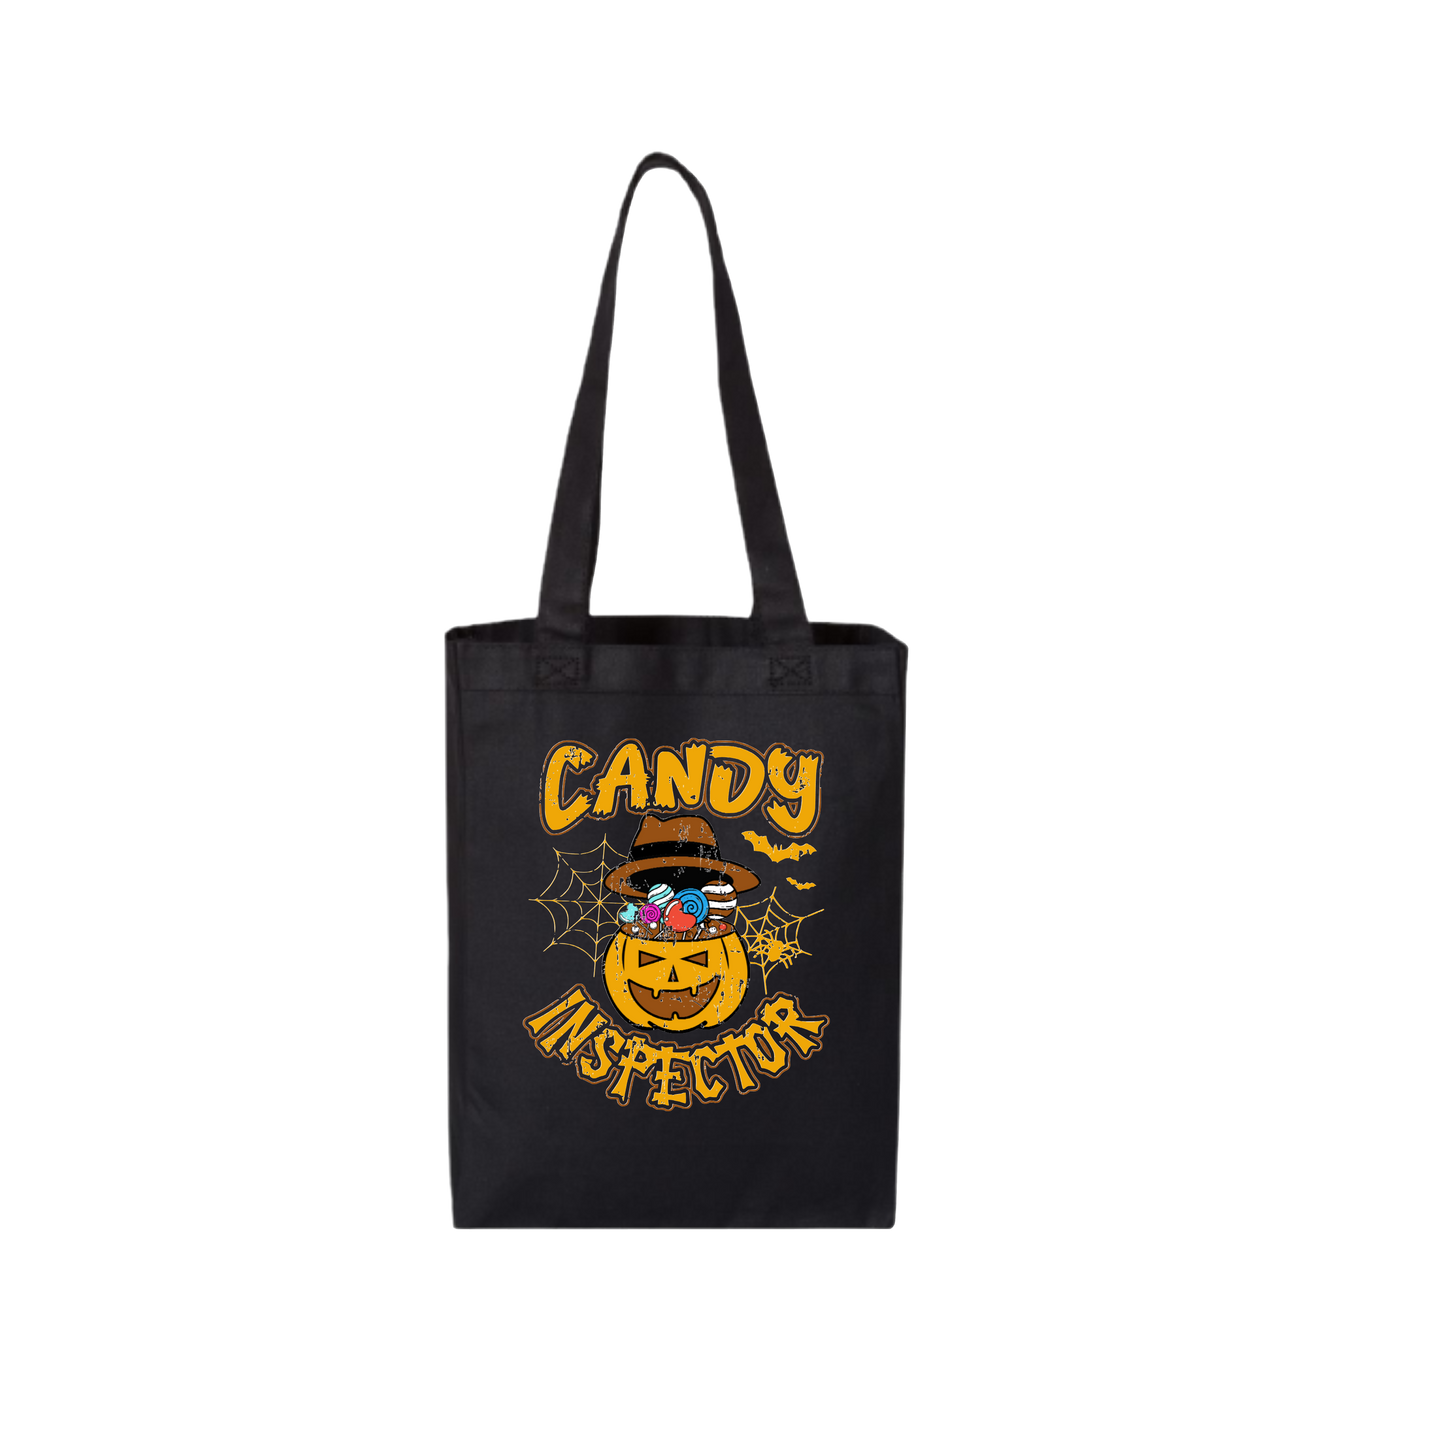 Candy Inspector w/ Jack-O' Lantern- Two Side Printed- Reusable Tote Bag - Halloween